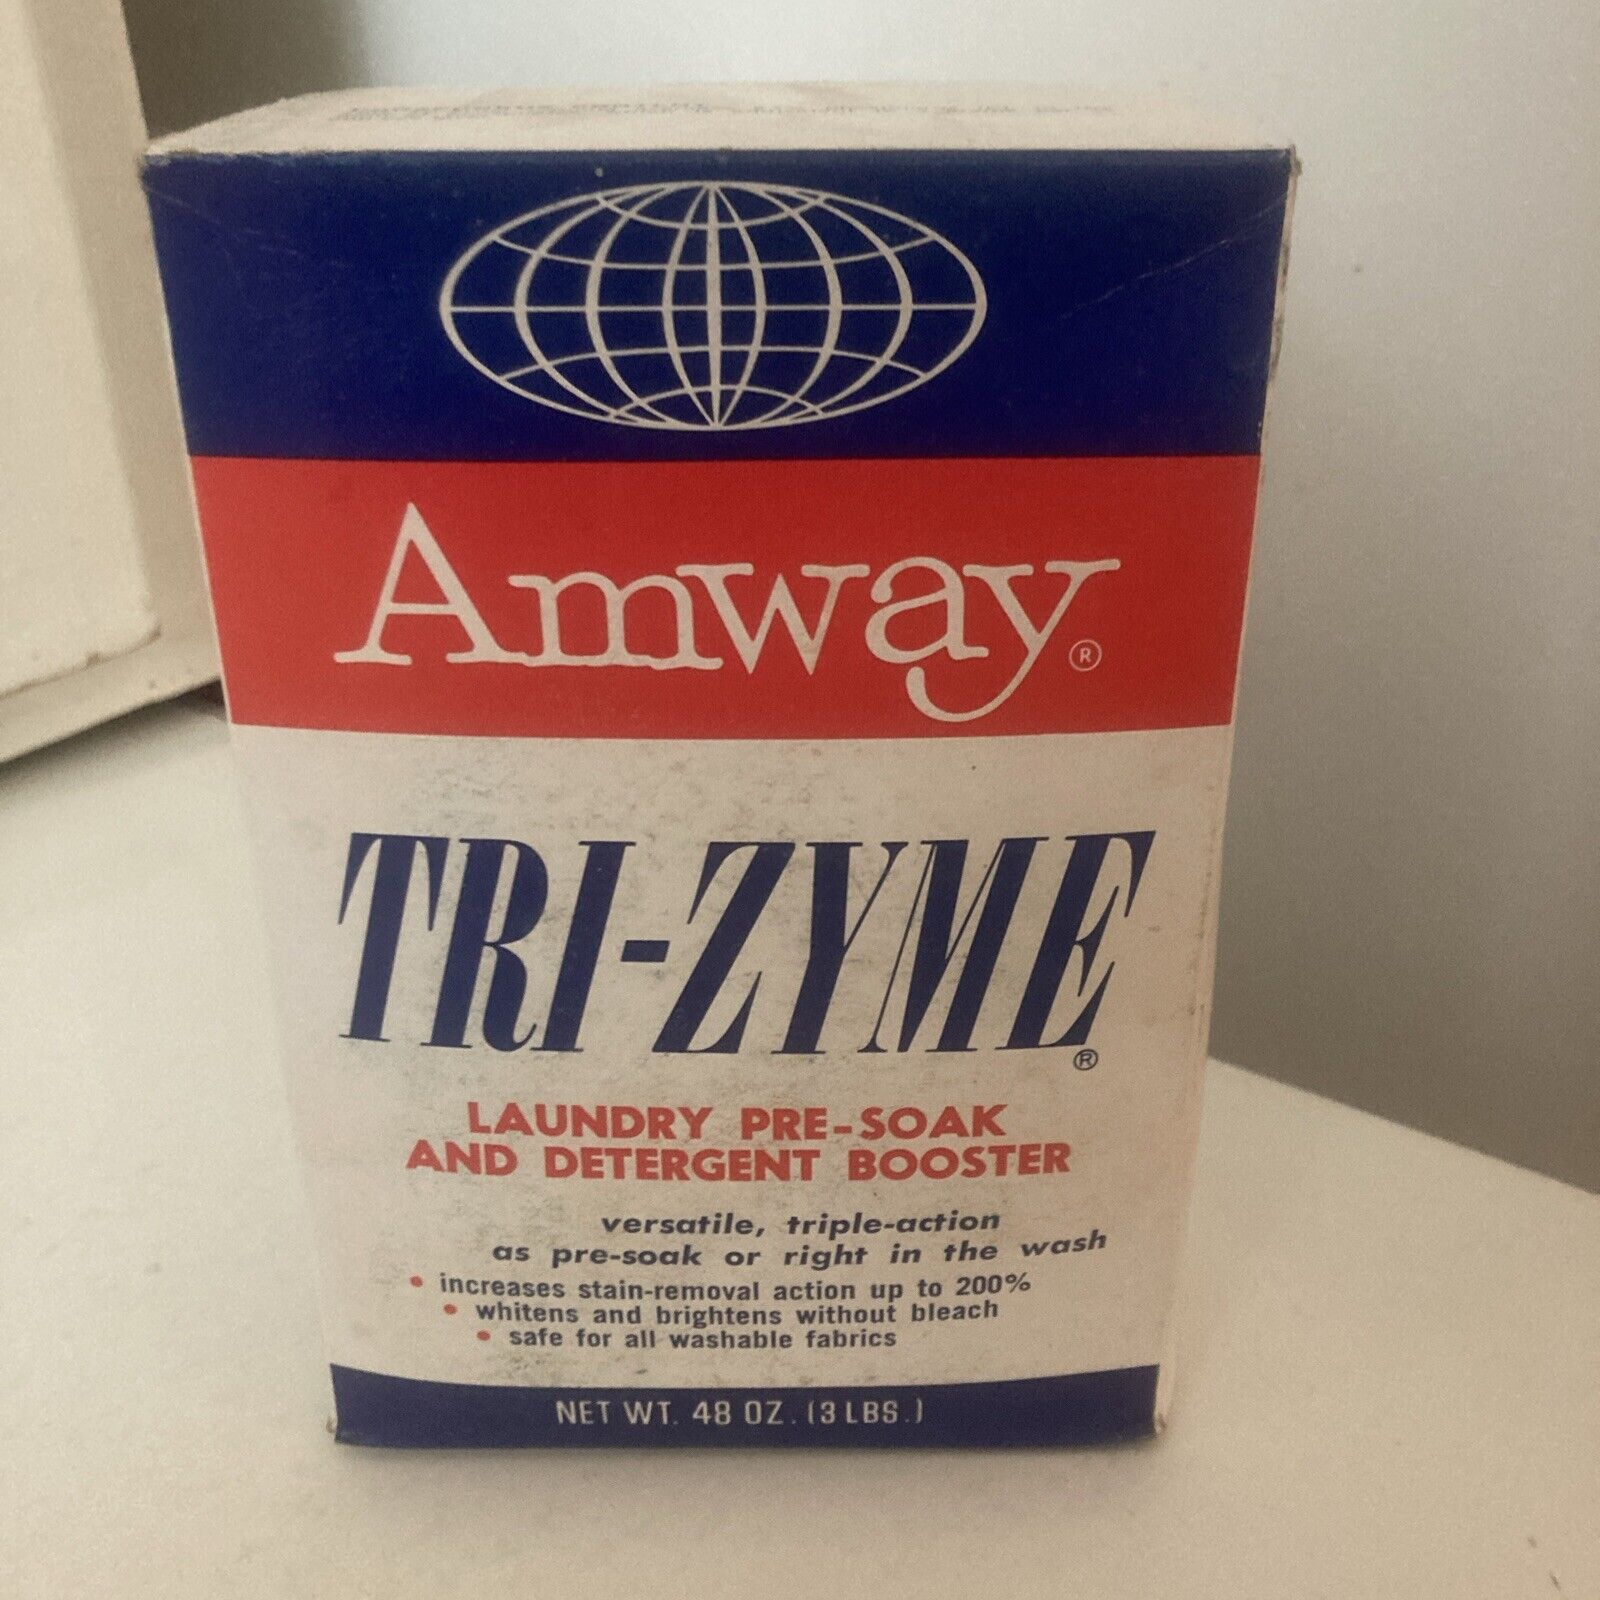 Vintage 1970’s Amway Laundry Tri-Zyme Pre-soak & Detergent Booster Full 7LBS NOS